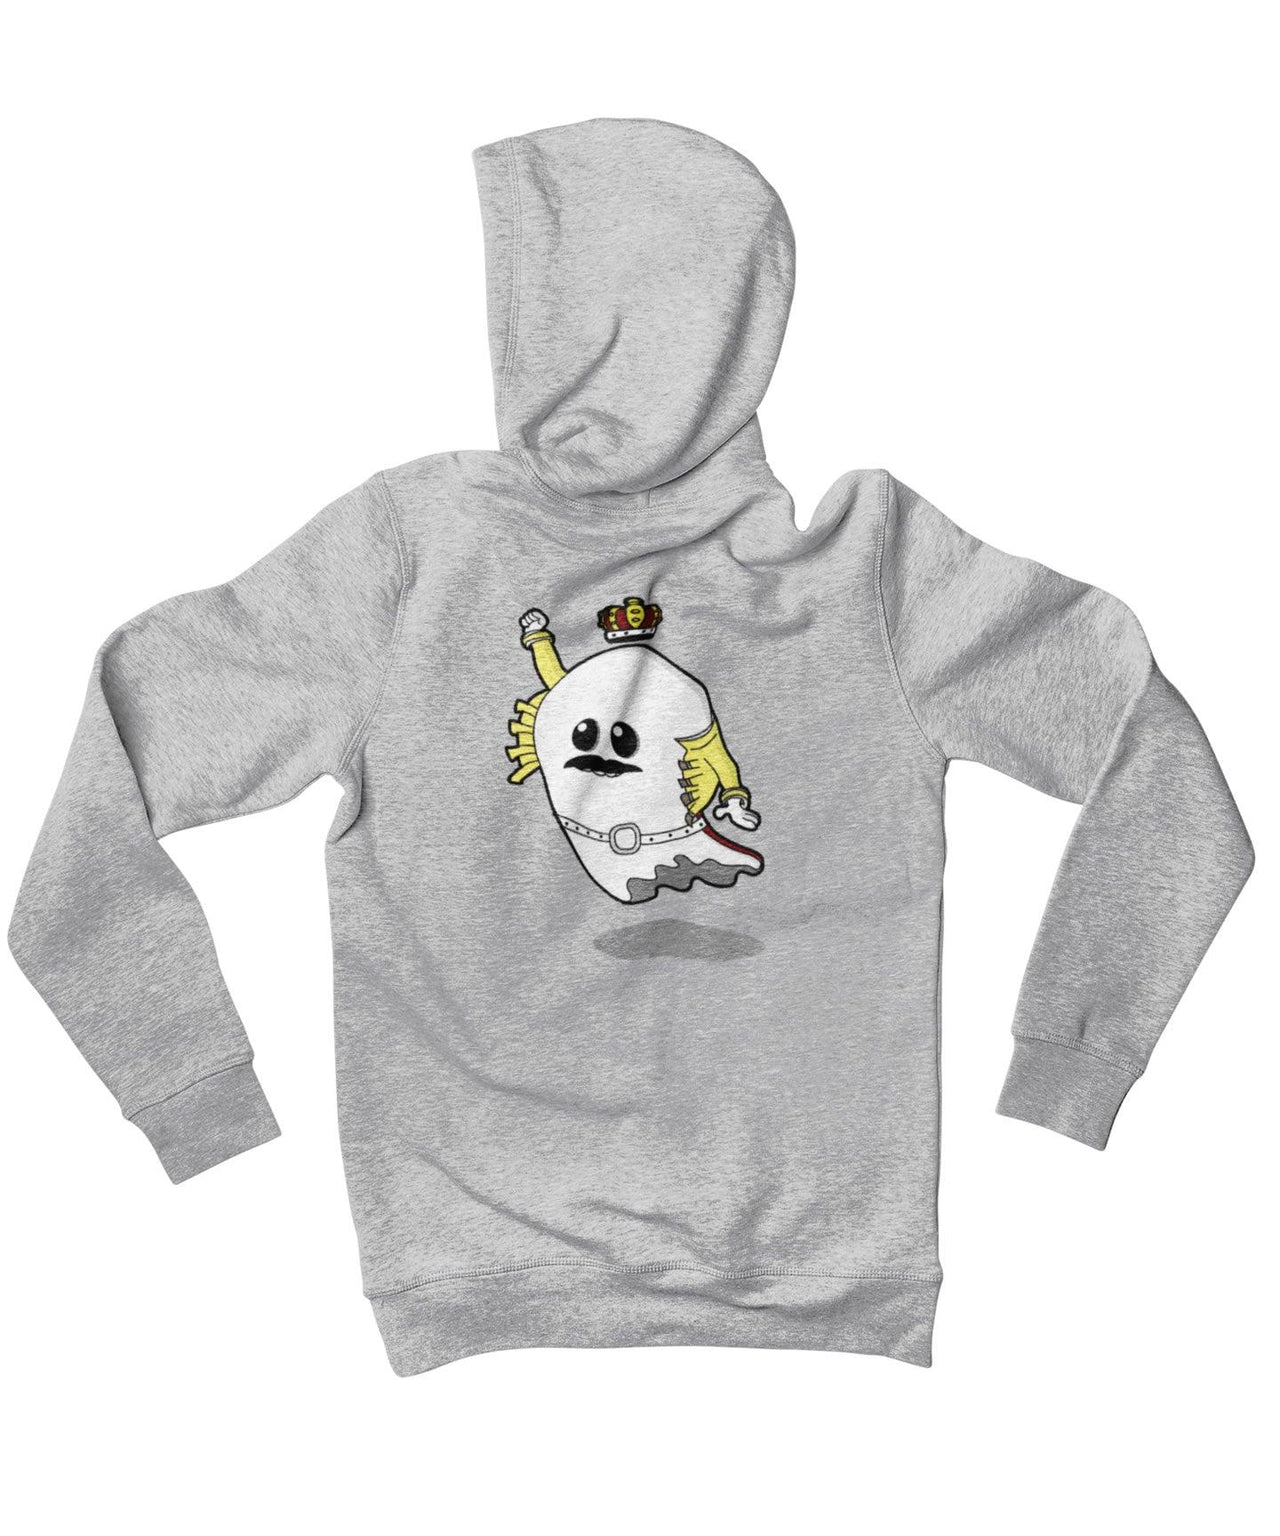 Top Notchy Deady Mercury Back Printed Hoodie For Men and Women 8Ball